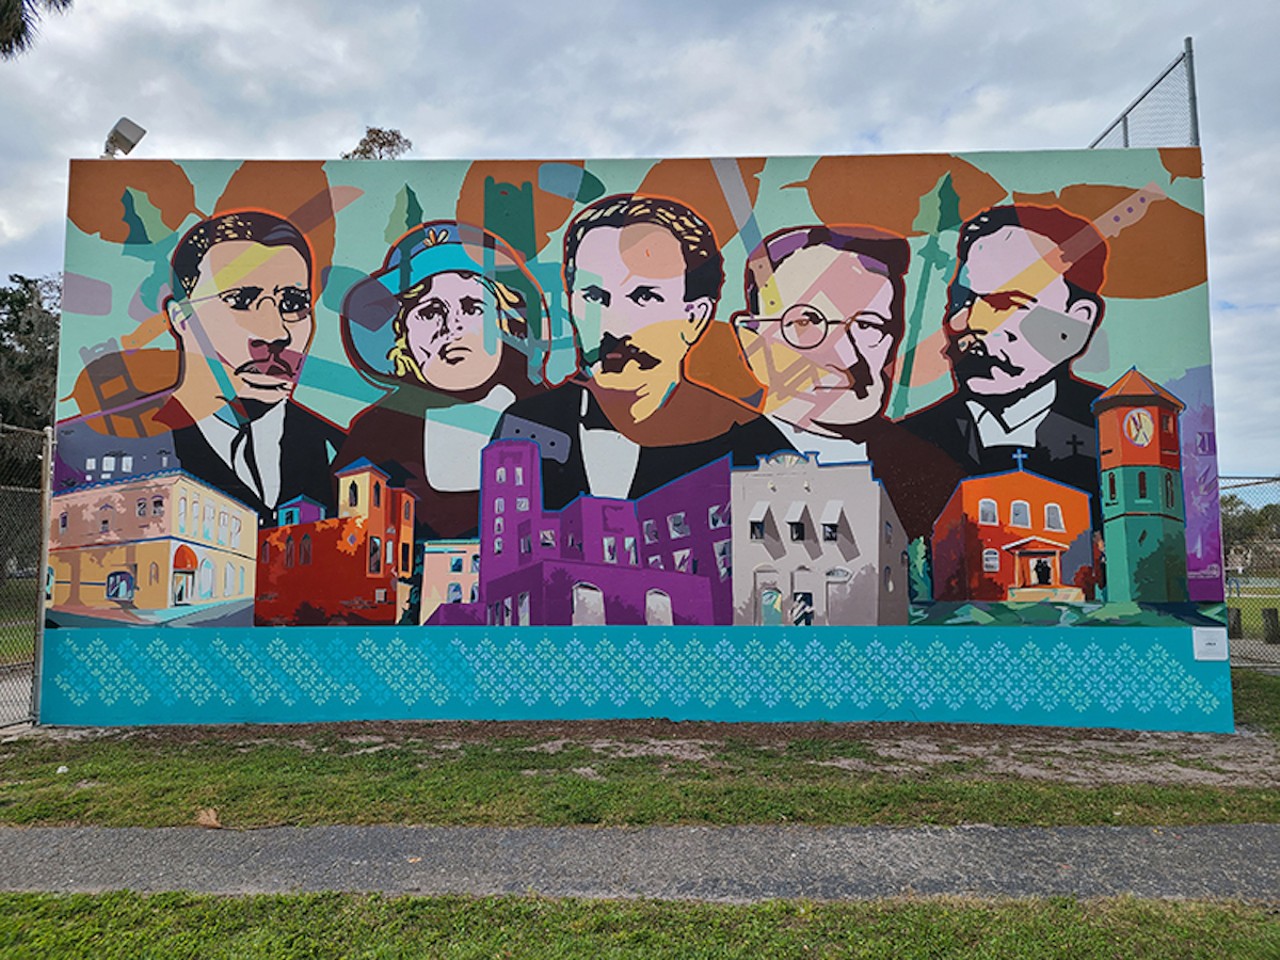 MacFarlane Park murals pay tribute to West Tampa’s history
1700 N MacDill Ave., Tampa
In 2005, the City of Tampa commissioned Tampa artists Edgar Sanchez Cumbas and Guillermo Portieles to paint a mural on West Tampa’s historic MacFarlane Park. “Kaleidoscope: A Heritage of Color,” tells West Tampa’s history through its people. From left to right, Kaleidoscope shows us the people who made Tampa—civil rights activist Robert Saunders, women’s rights activist Luisa Capetillo, Cuban nationalist Jose Marti, West Tampa founder Hugh Macfarlane, and Fernando Figueredo, the first Mayor of West Tampa.Photo via City of Tampa